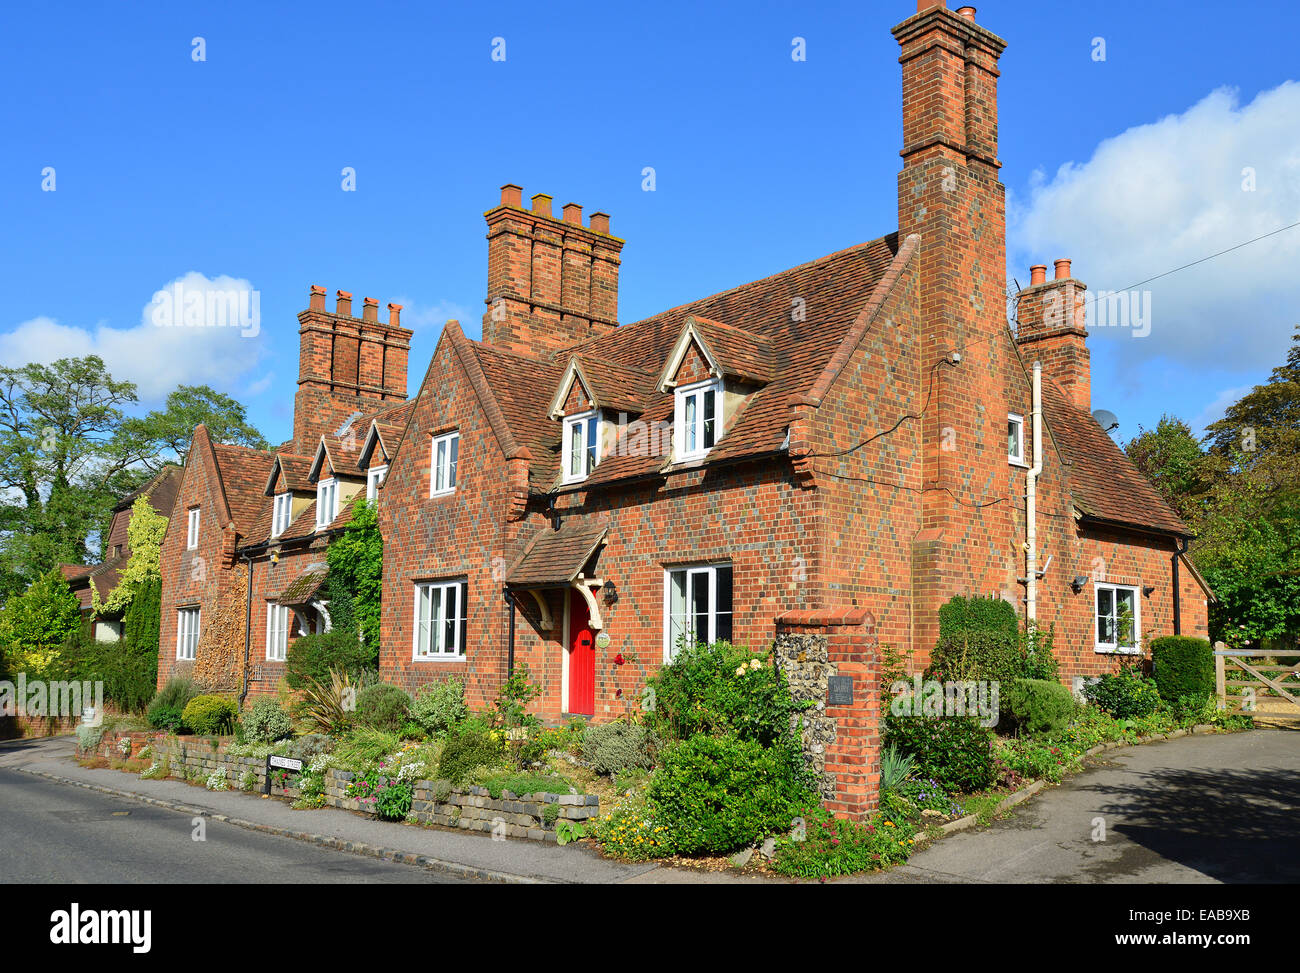 Période cottage, Thames Street, Sonning-On-Thames, Berkshire, Angleterre, Royaume-Uni Banque D'Images